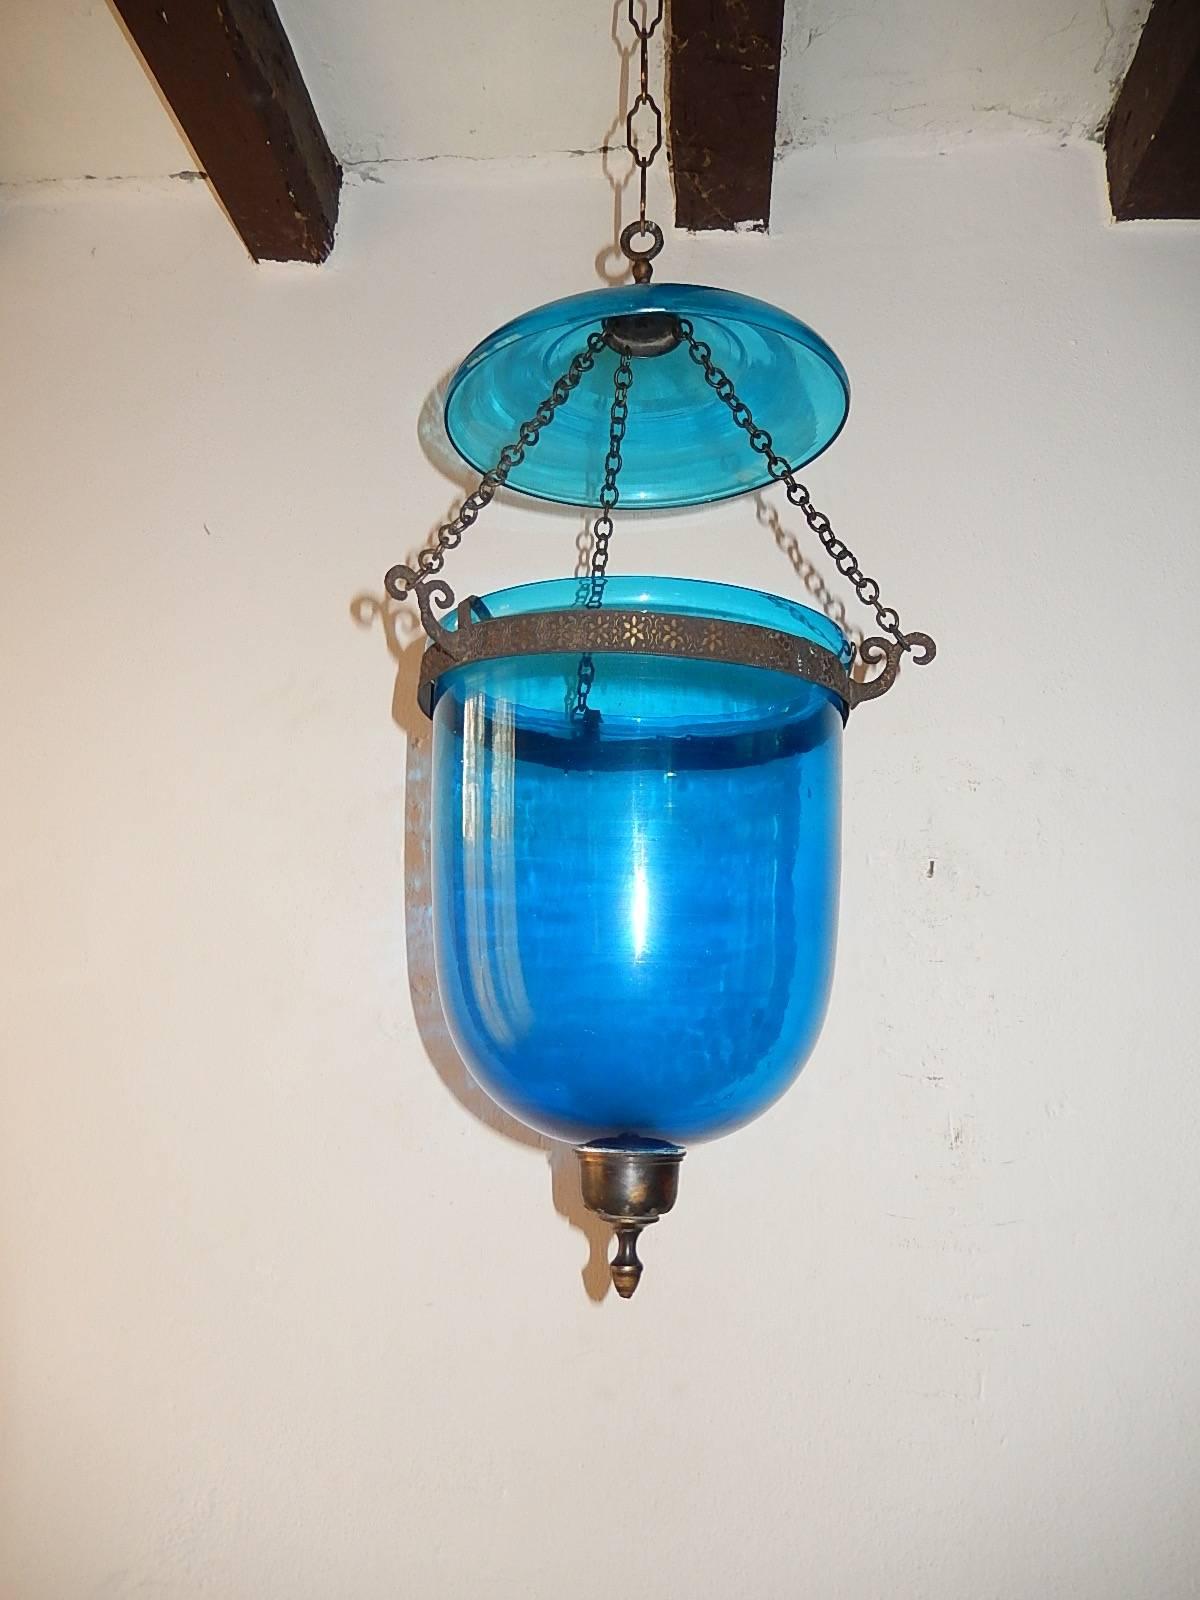 Rare cobalt color.  Made for candles, could be wired.  Bronze details.  The bell alone measures 13 inches.  